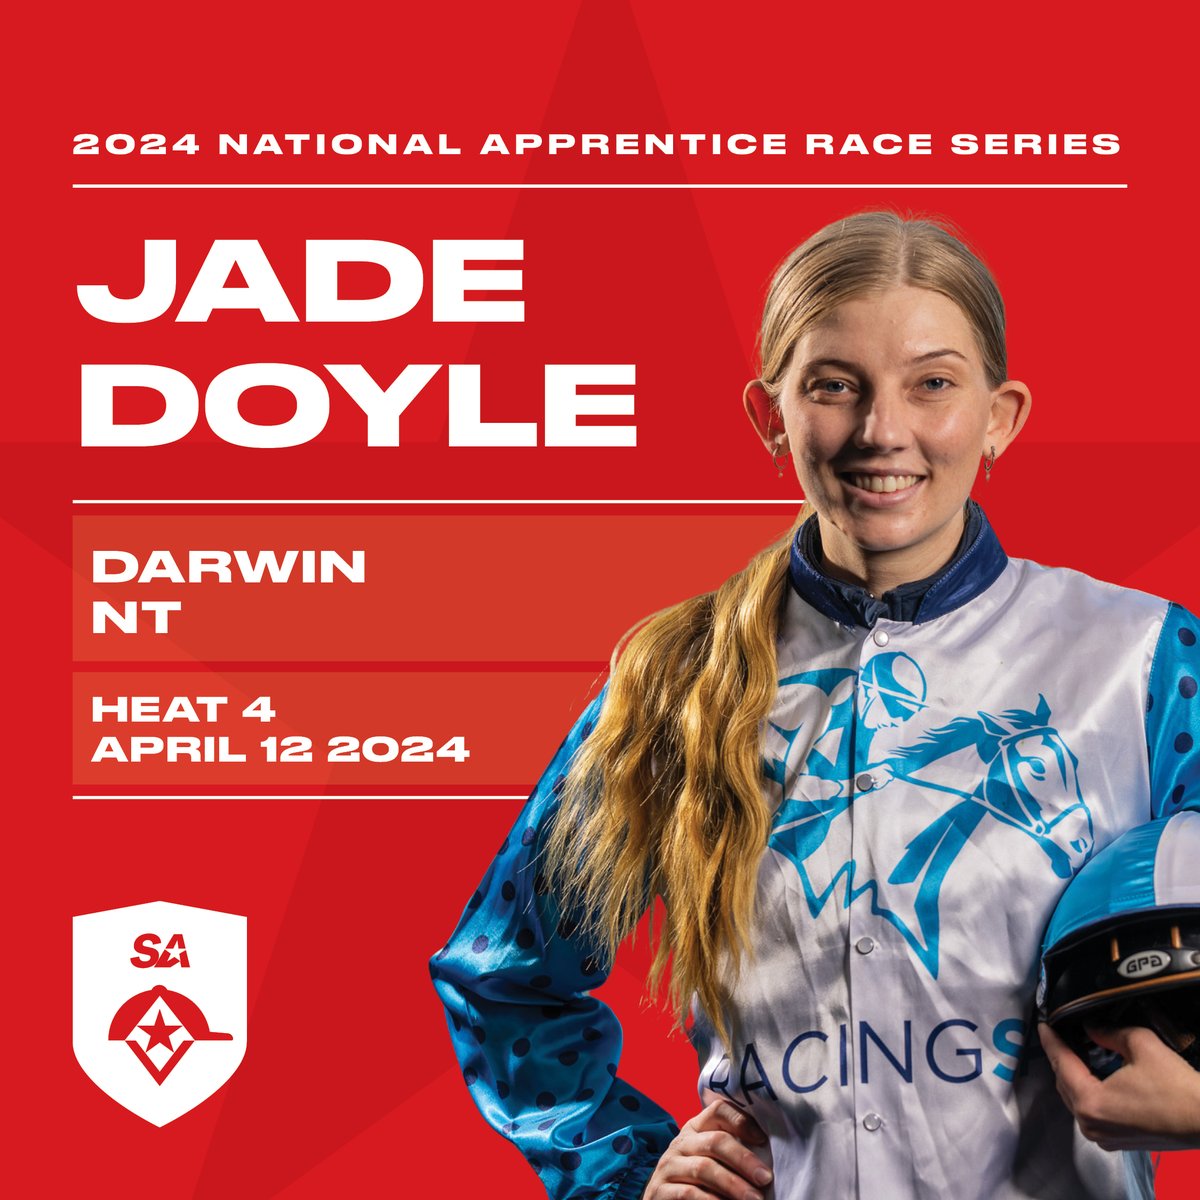 Heat 4 of the National Apprentice Race Series takes place tomorrow, and Jade Doyle is off to Darwin 🤩 SA is currently in the lead with 33 points, while NT sit in second with 23 points. Get behind Jade as she looks to widen the gap at the top!